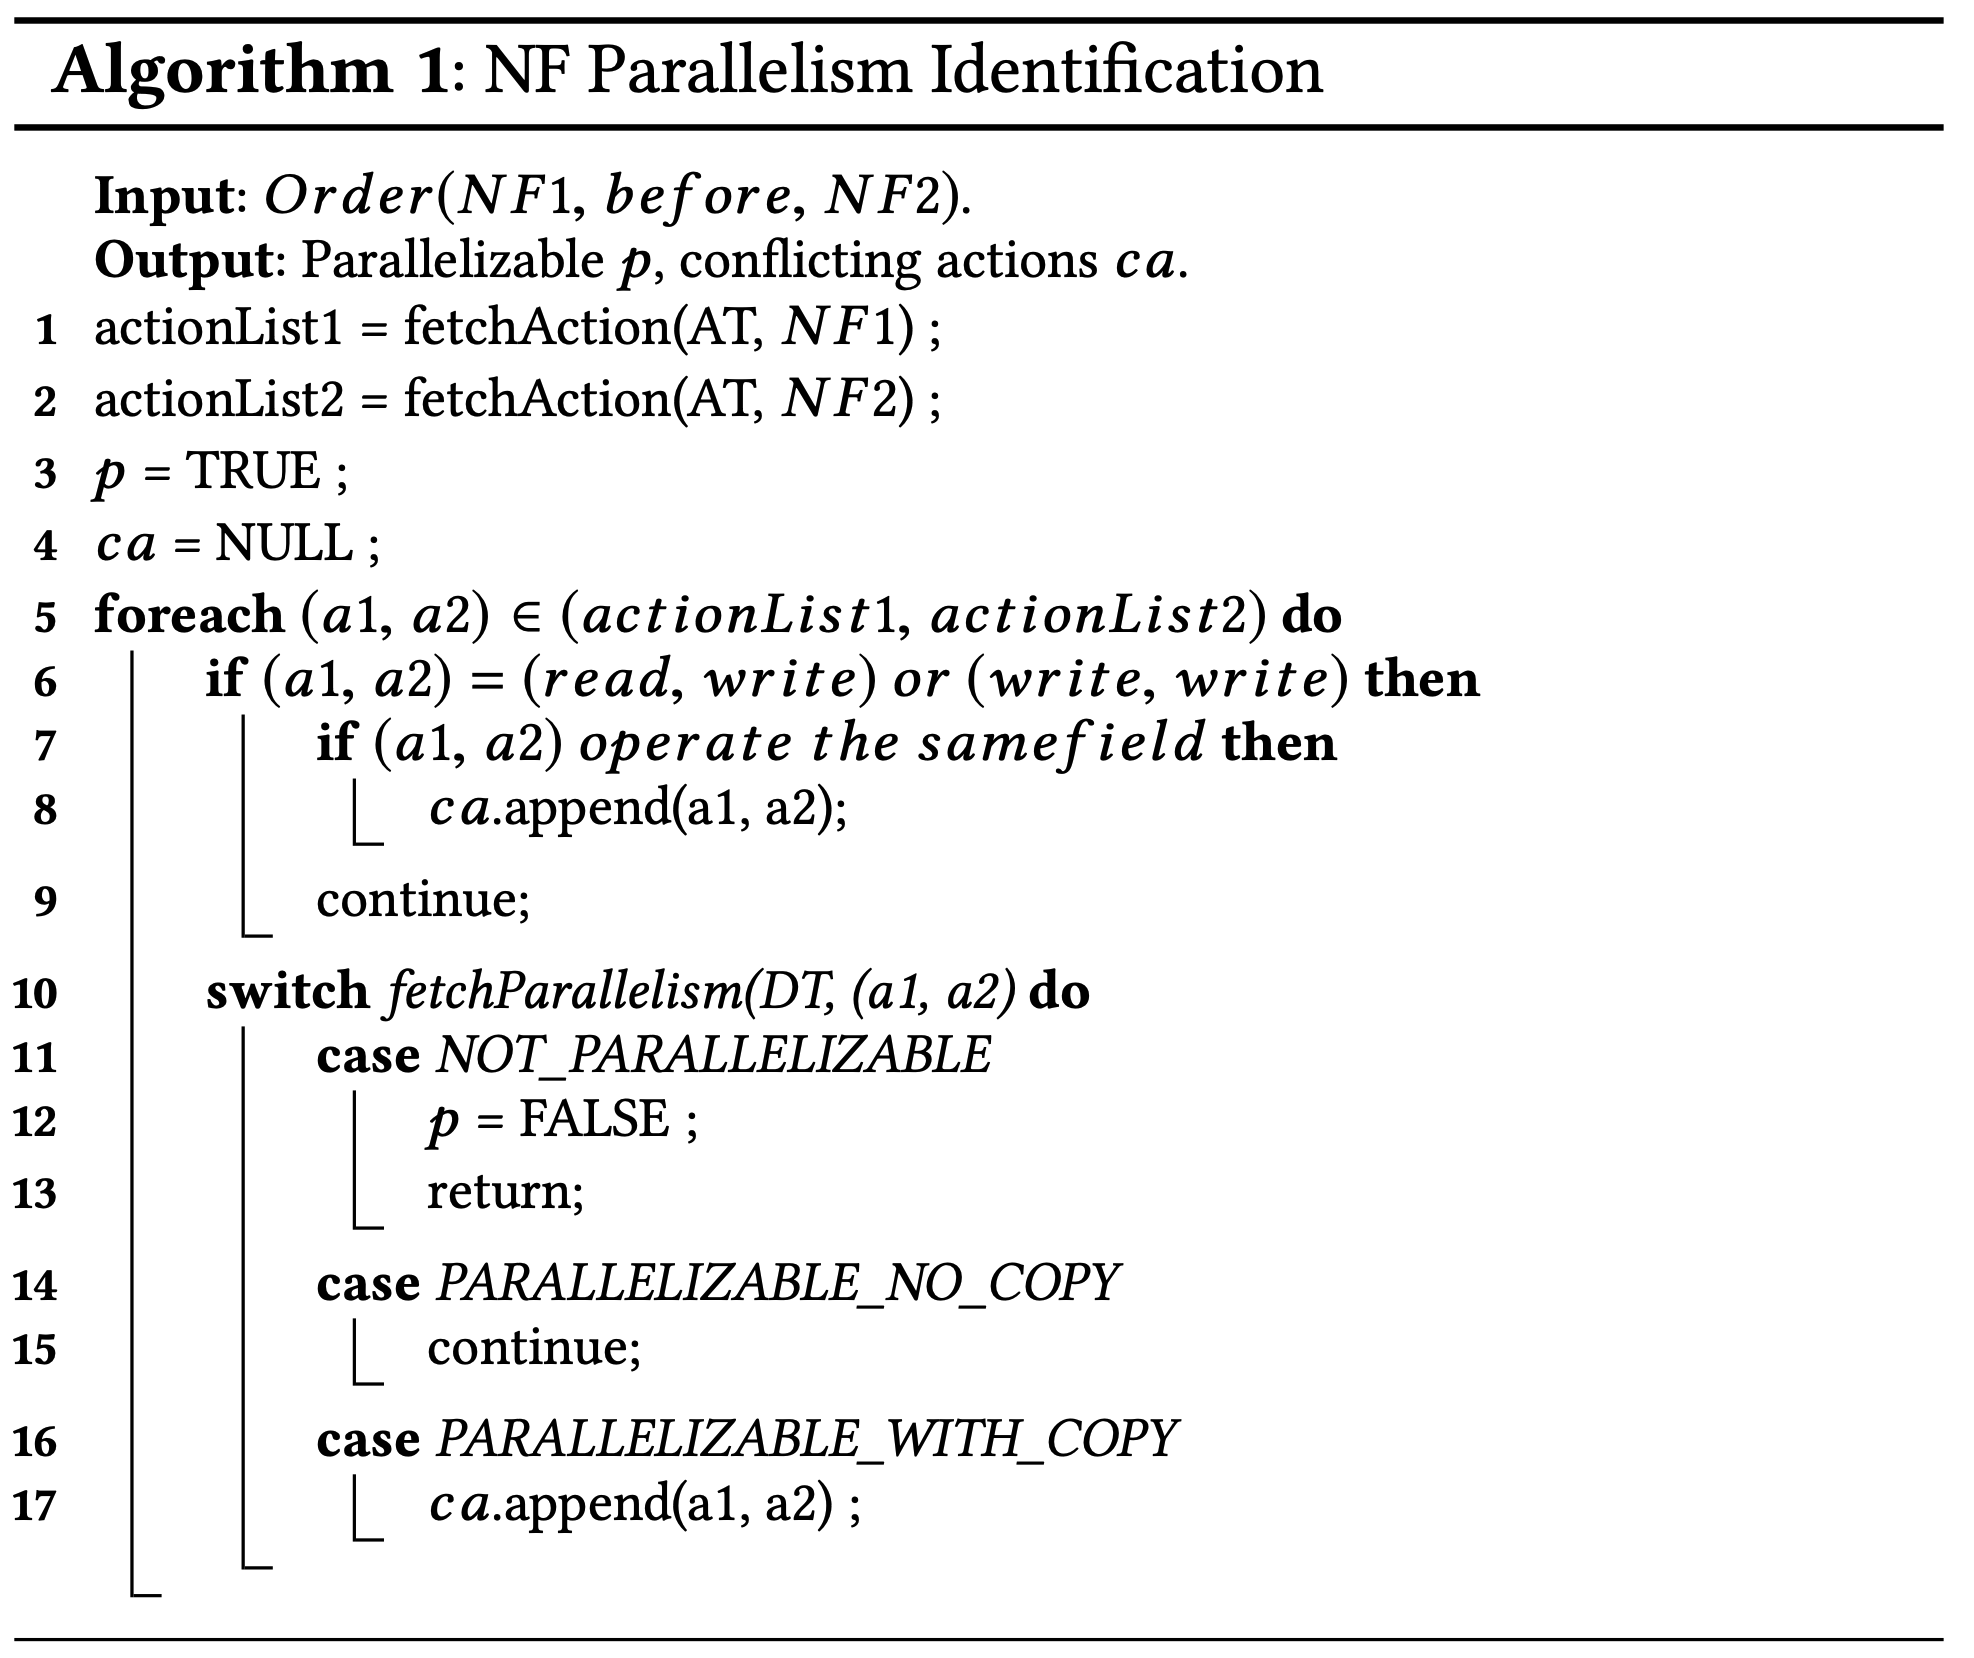 /img/NFP%20Enabling%20Network%20Function%20Parallelism%20in%20NFV/Untitled%204.png